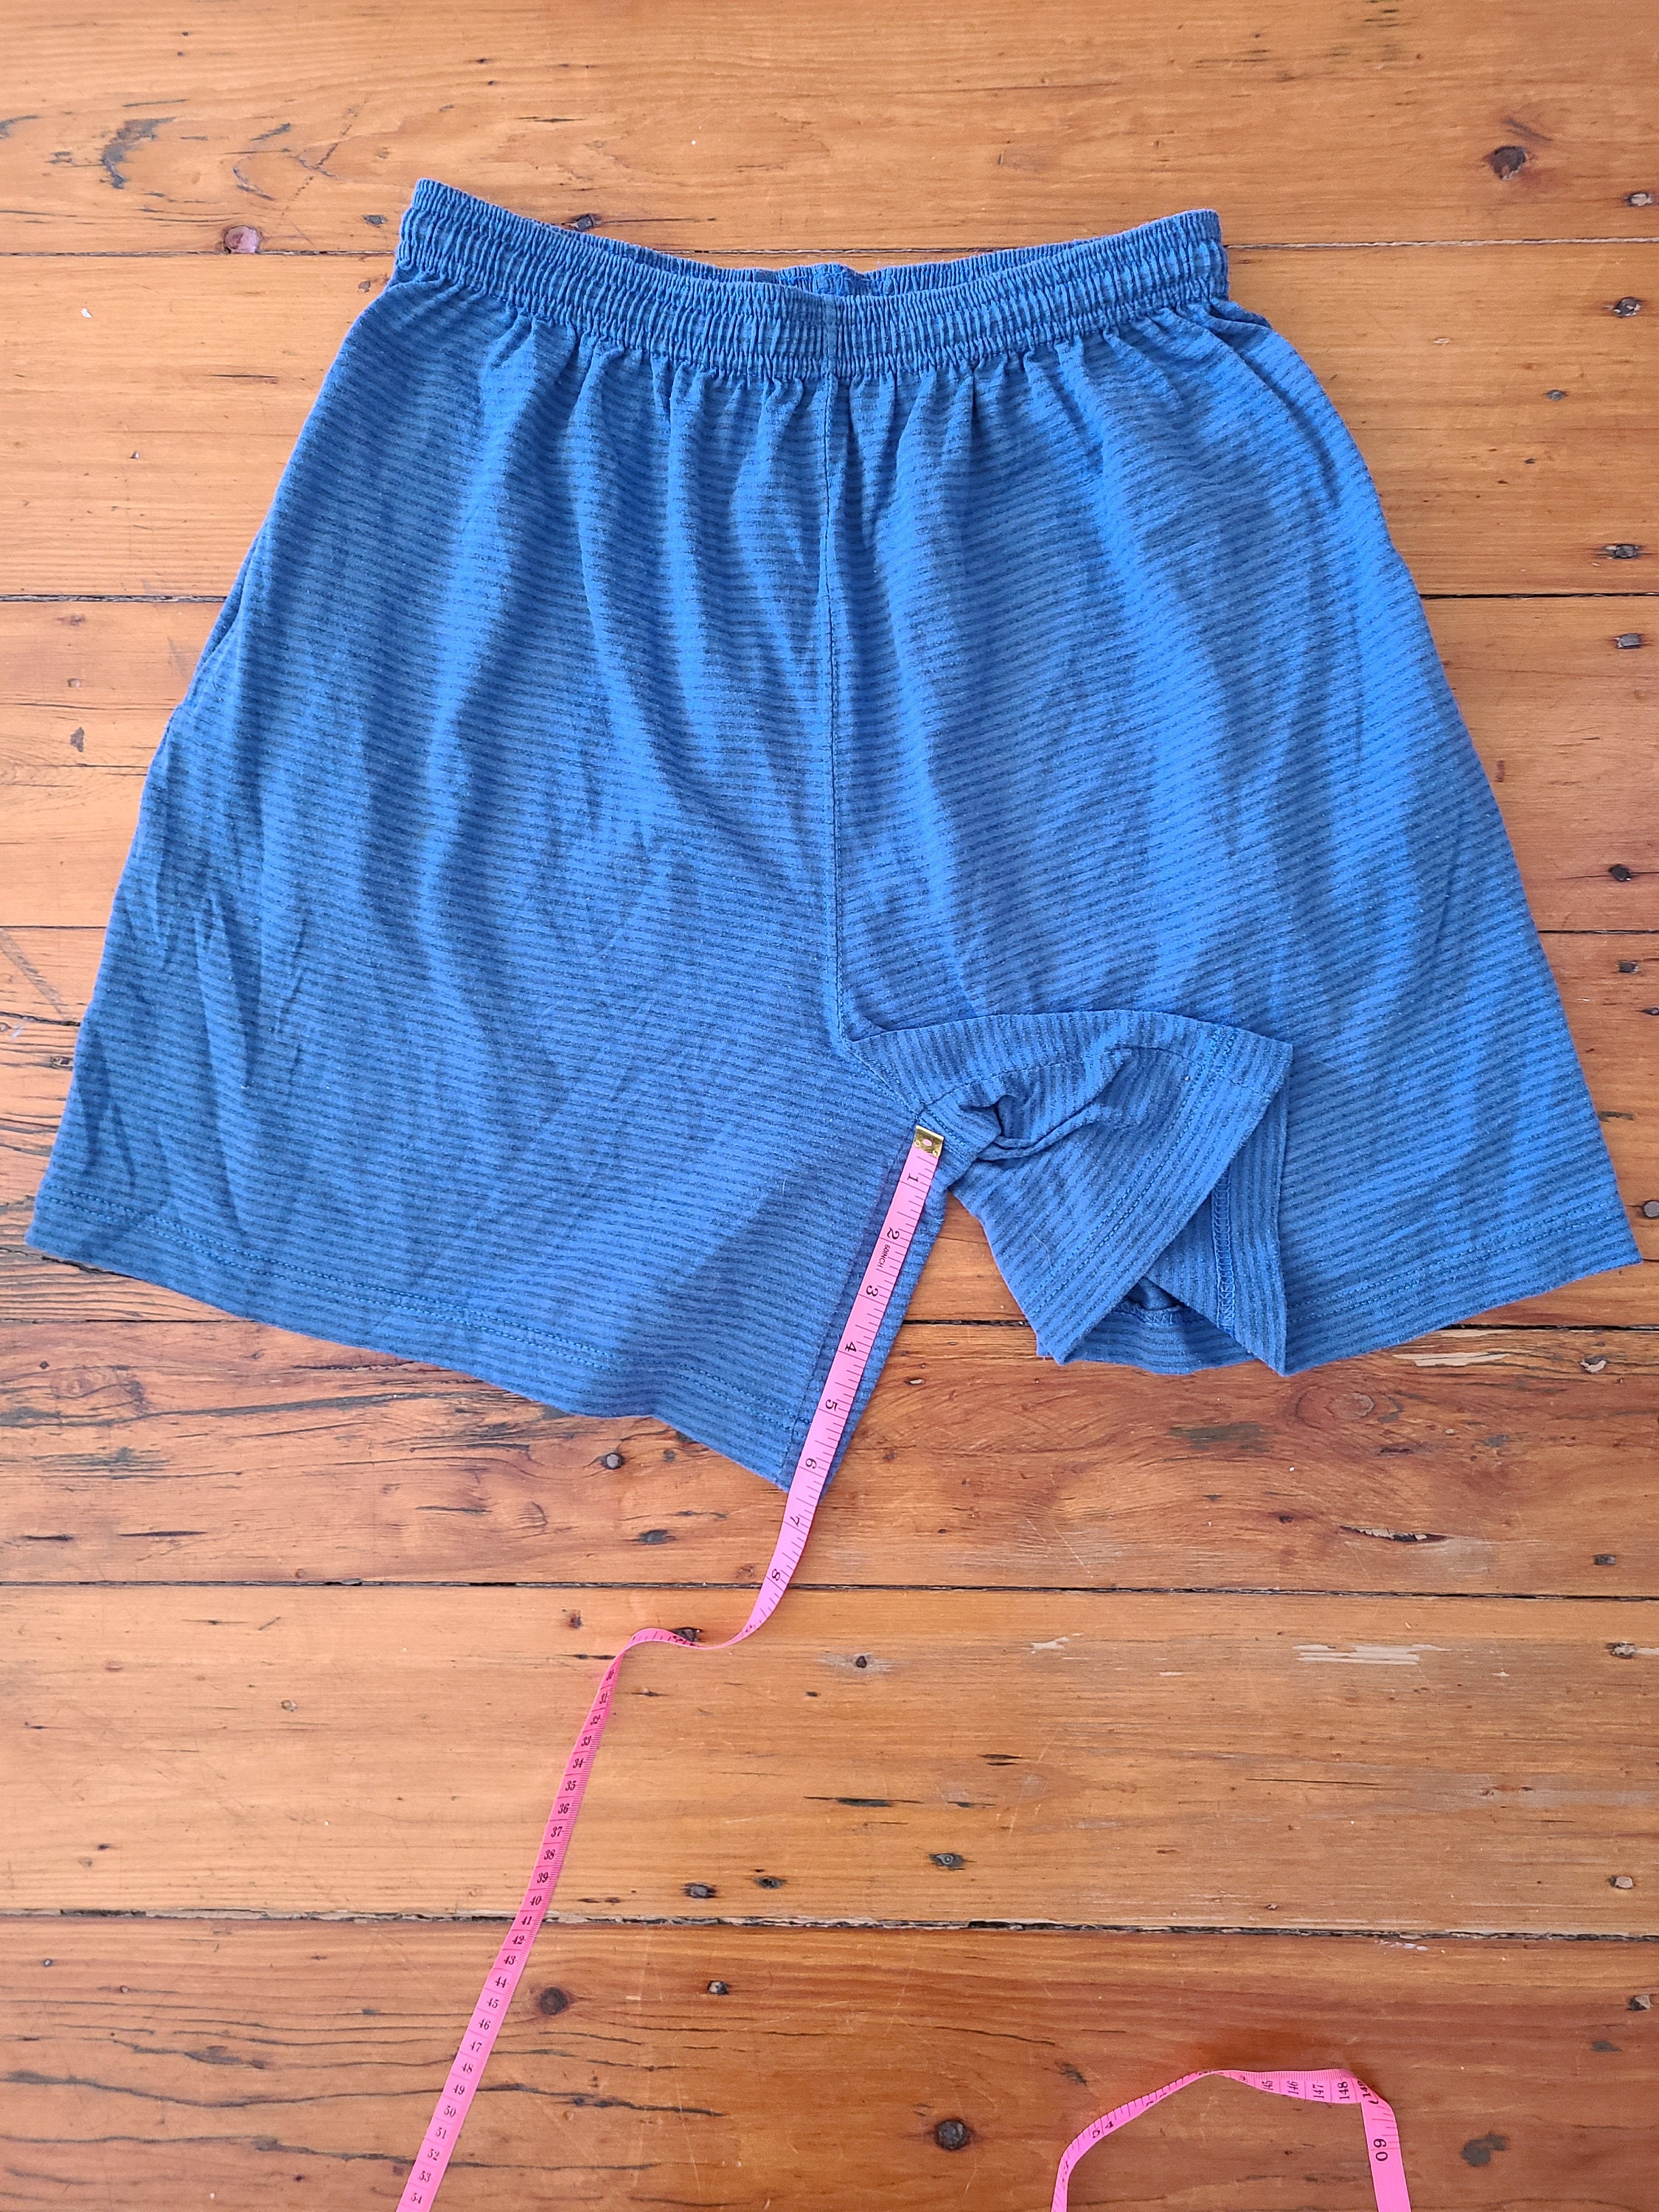 Vintage 90s Russell Athletic Cotton Shorts Sz L Made in USA 